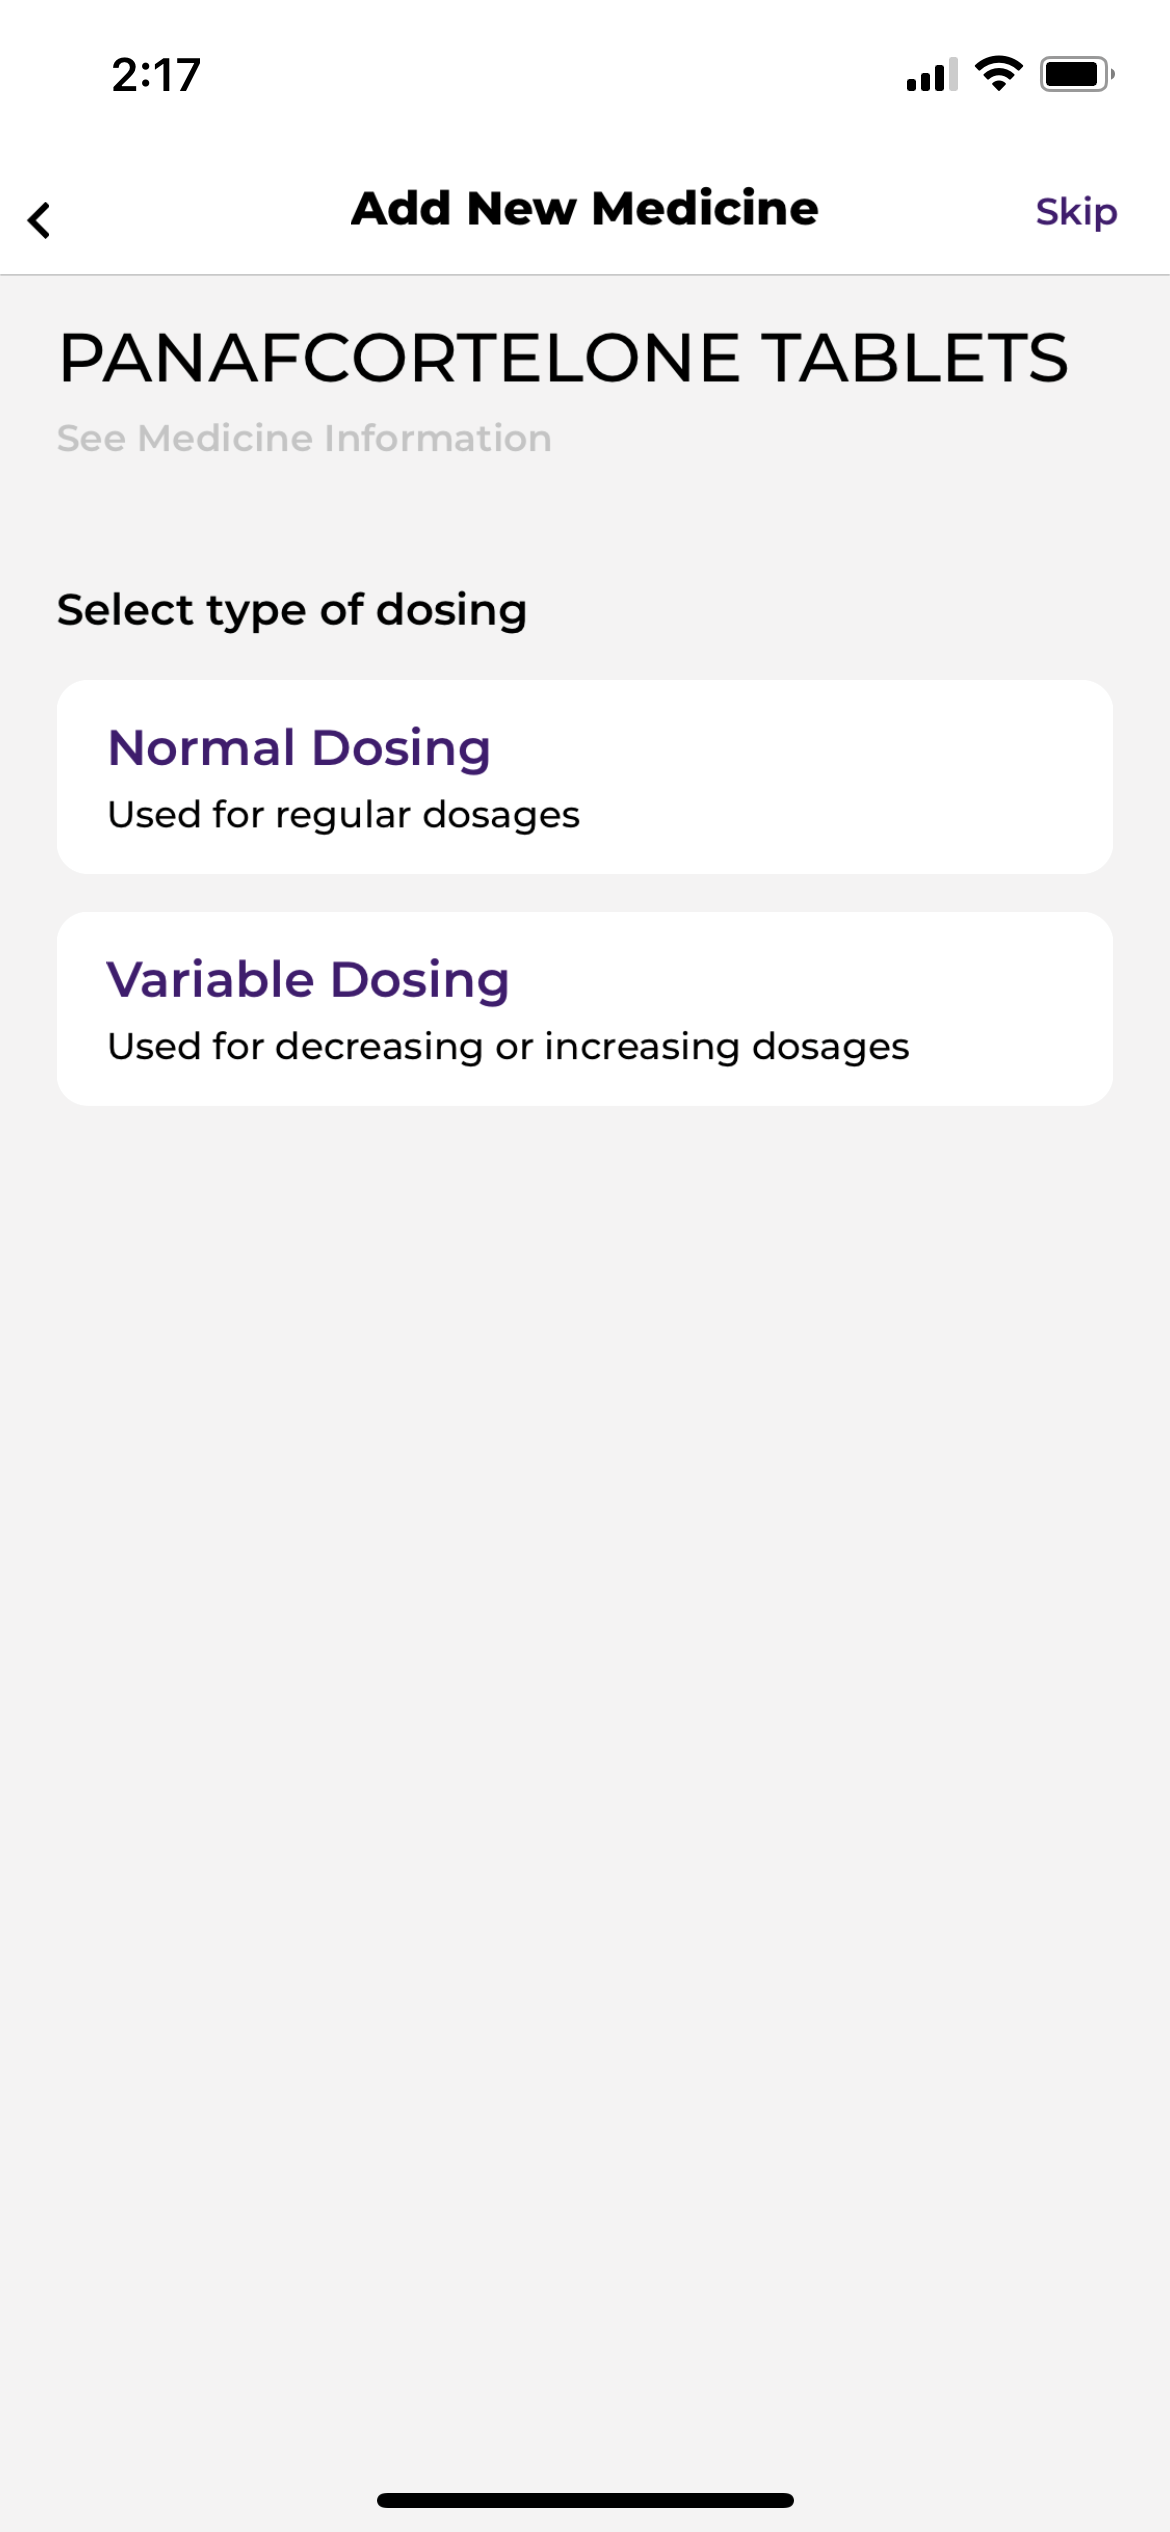 Medicinewise App screen showing selection of dose type